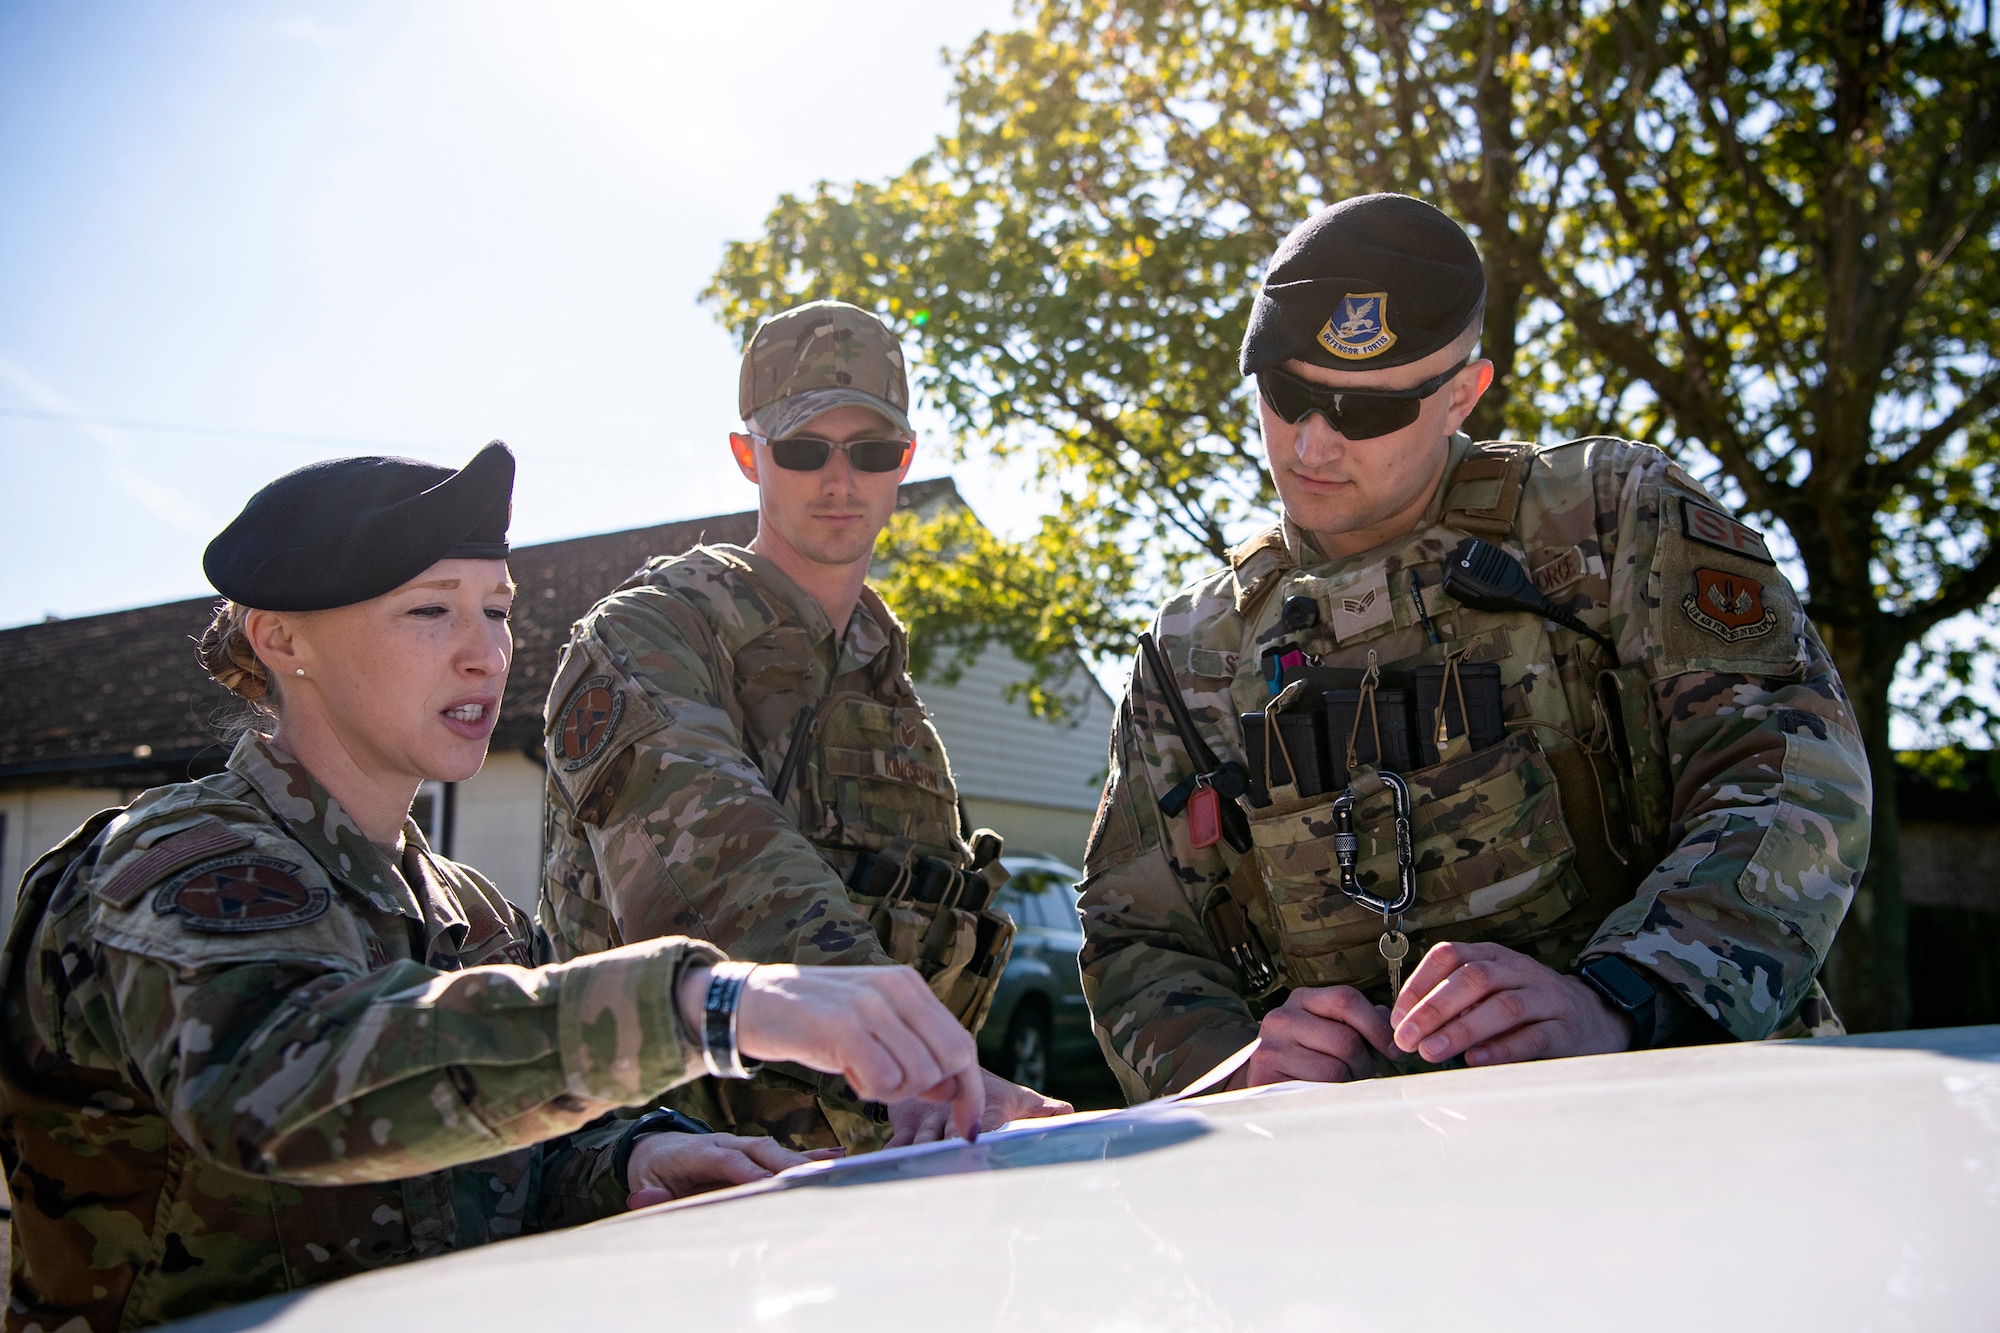 U.S. Air Force Master Sgt. Melissa Jackson, 423d Security Forces Squadron section chief of training, provides feedback to Airmen from the 423d SFS following a simulated domestic disturbance at RAF Alconbury, England, April 26, 2022. The exercise was designed to evaluate the strengths and weaknesses of 423d SFS members' response to various scenarios including domestic disturbances, drunk driving and other base security incidents. (U.S. Air Force photo by Staff Sgt. Eugene Oliver)